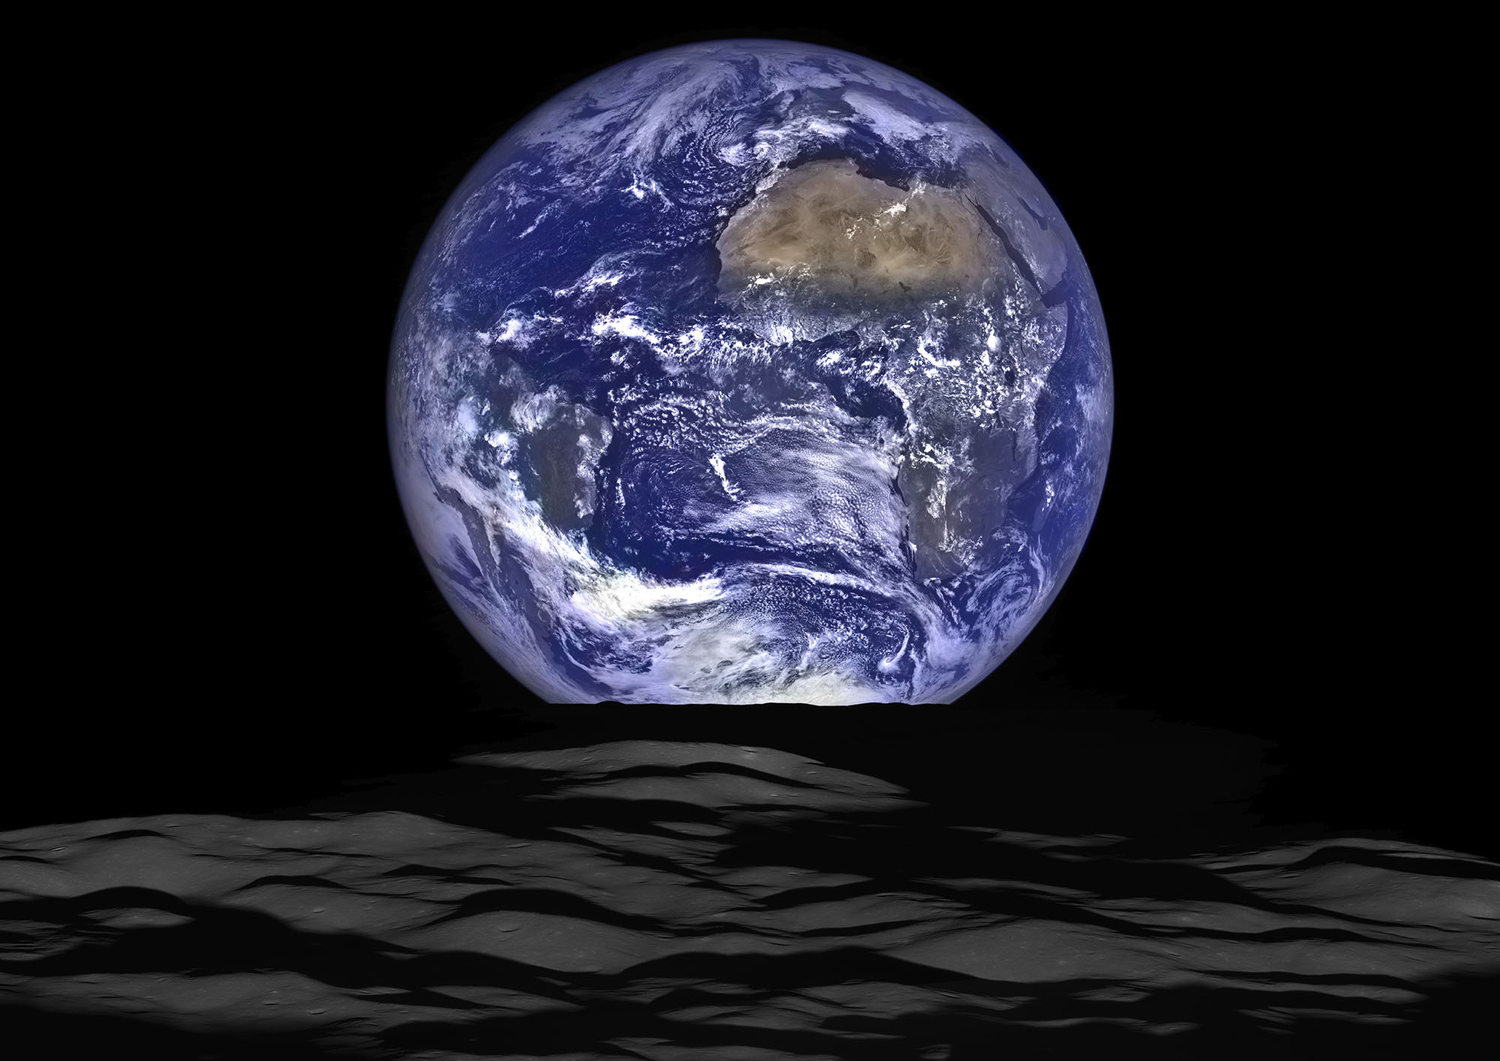 the moon from earth